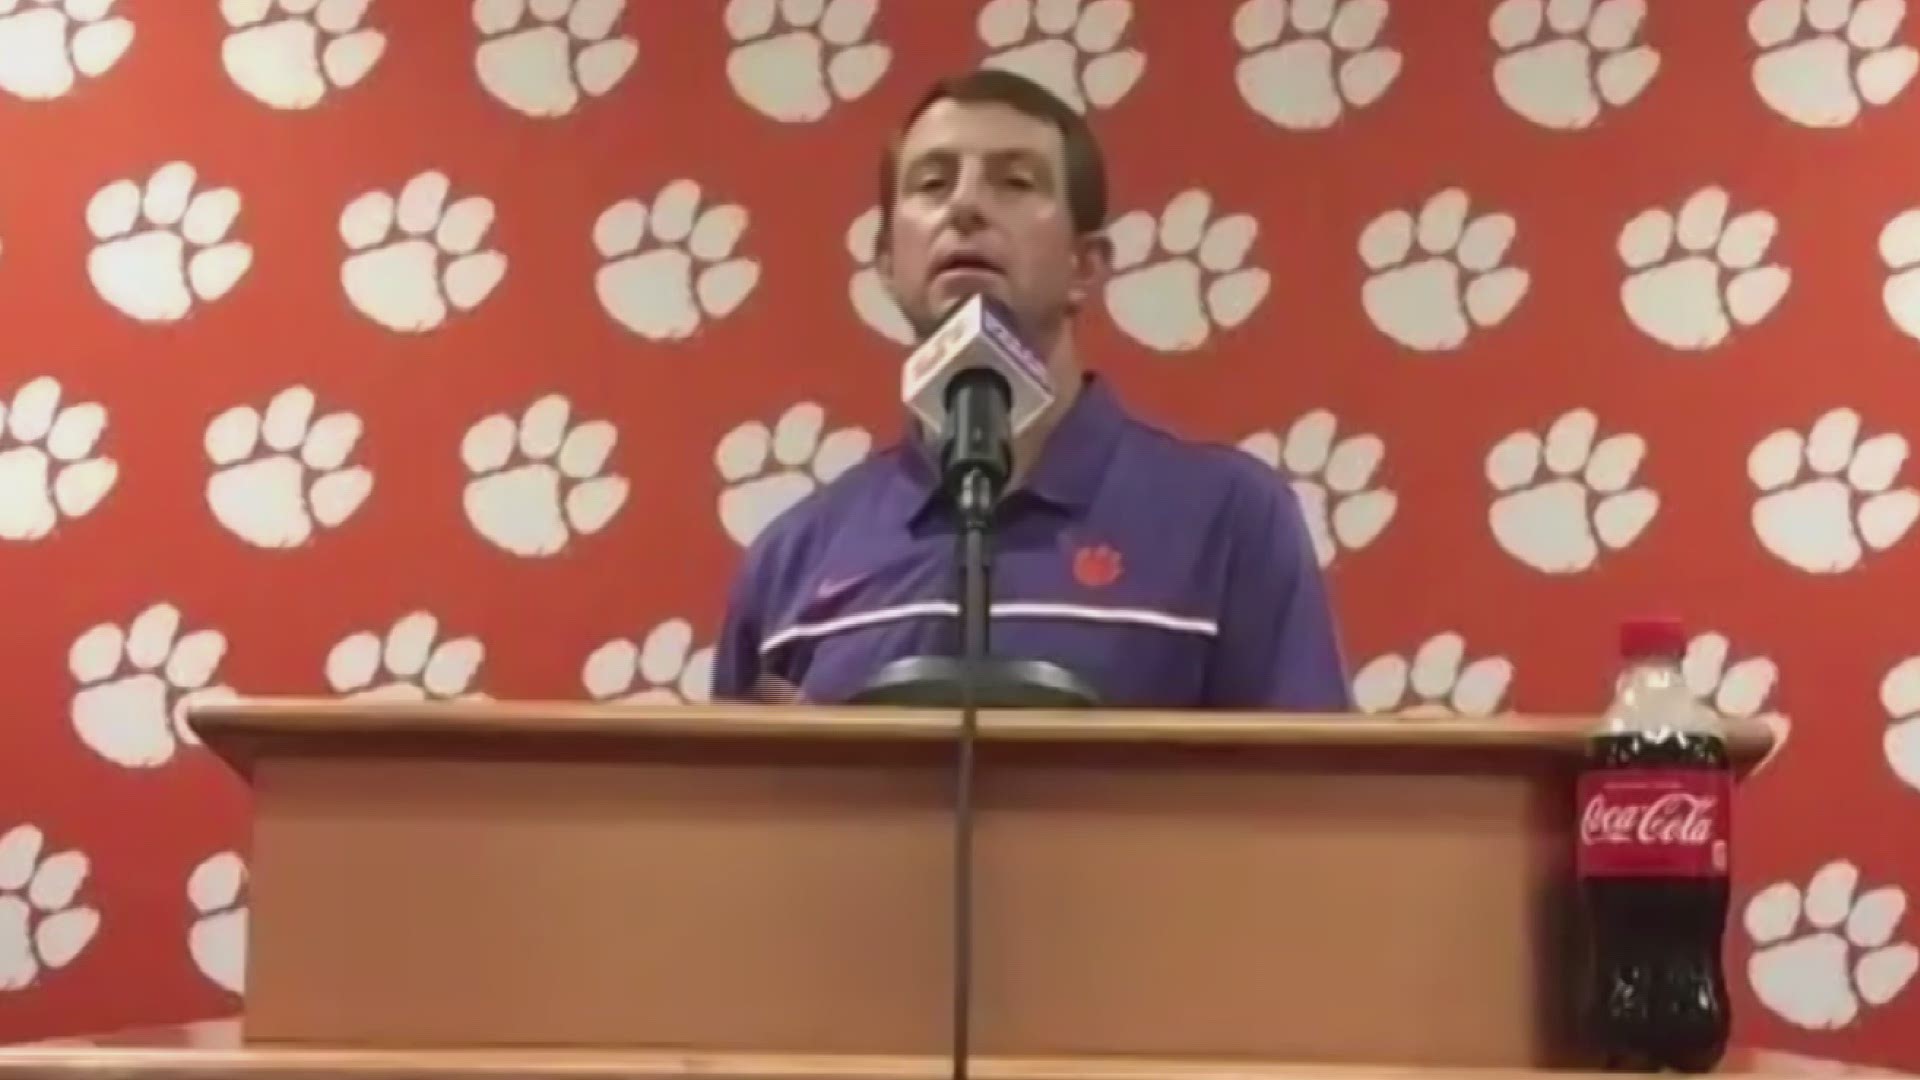 Clemson head football coach Dabo Swinney says his philosophy concerning game repetitions could serve his team well in 2020.